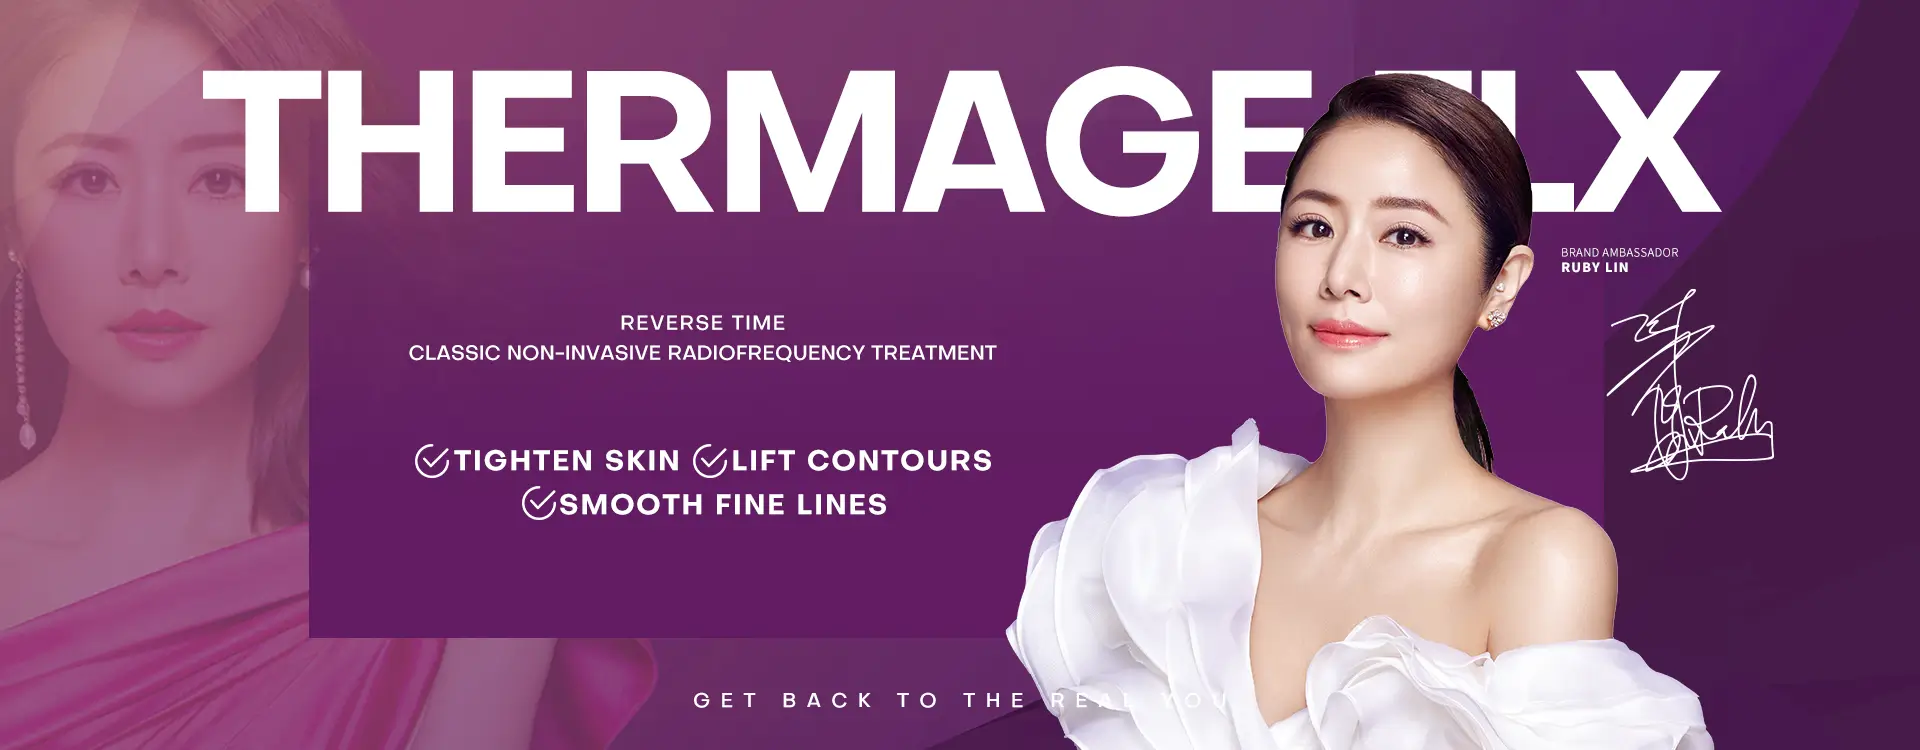 Thermage FLX, Reverse Time. Classic Non-Invasive Radiofrequency Treatment
